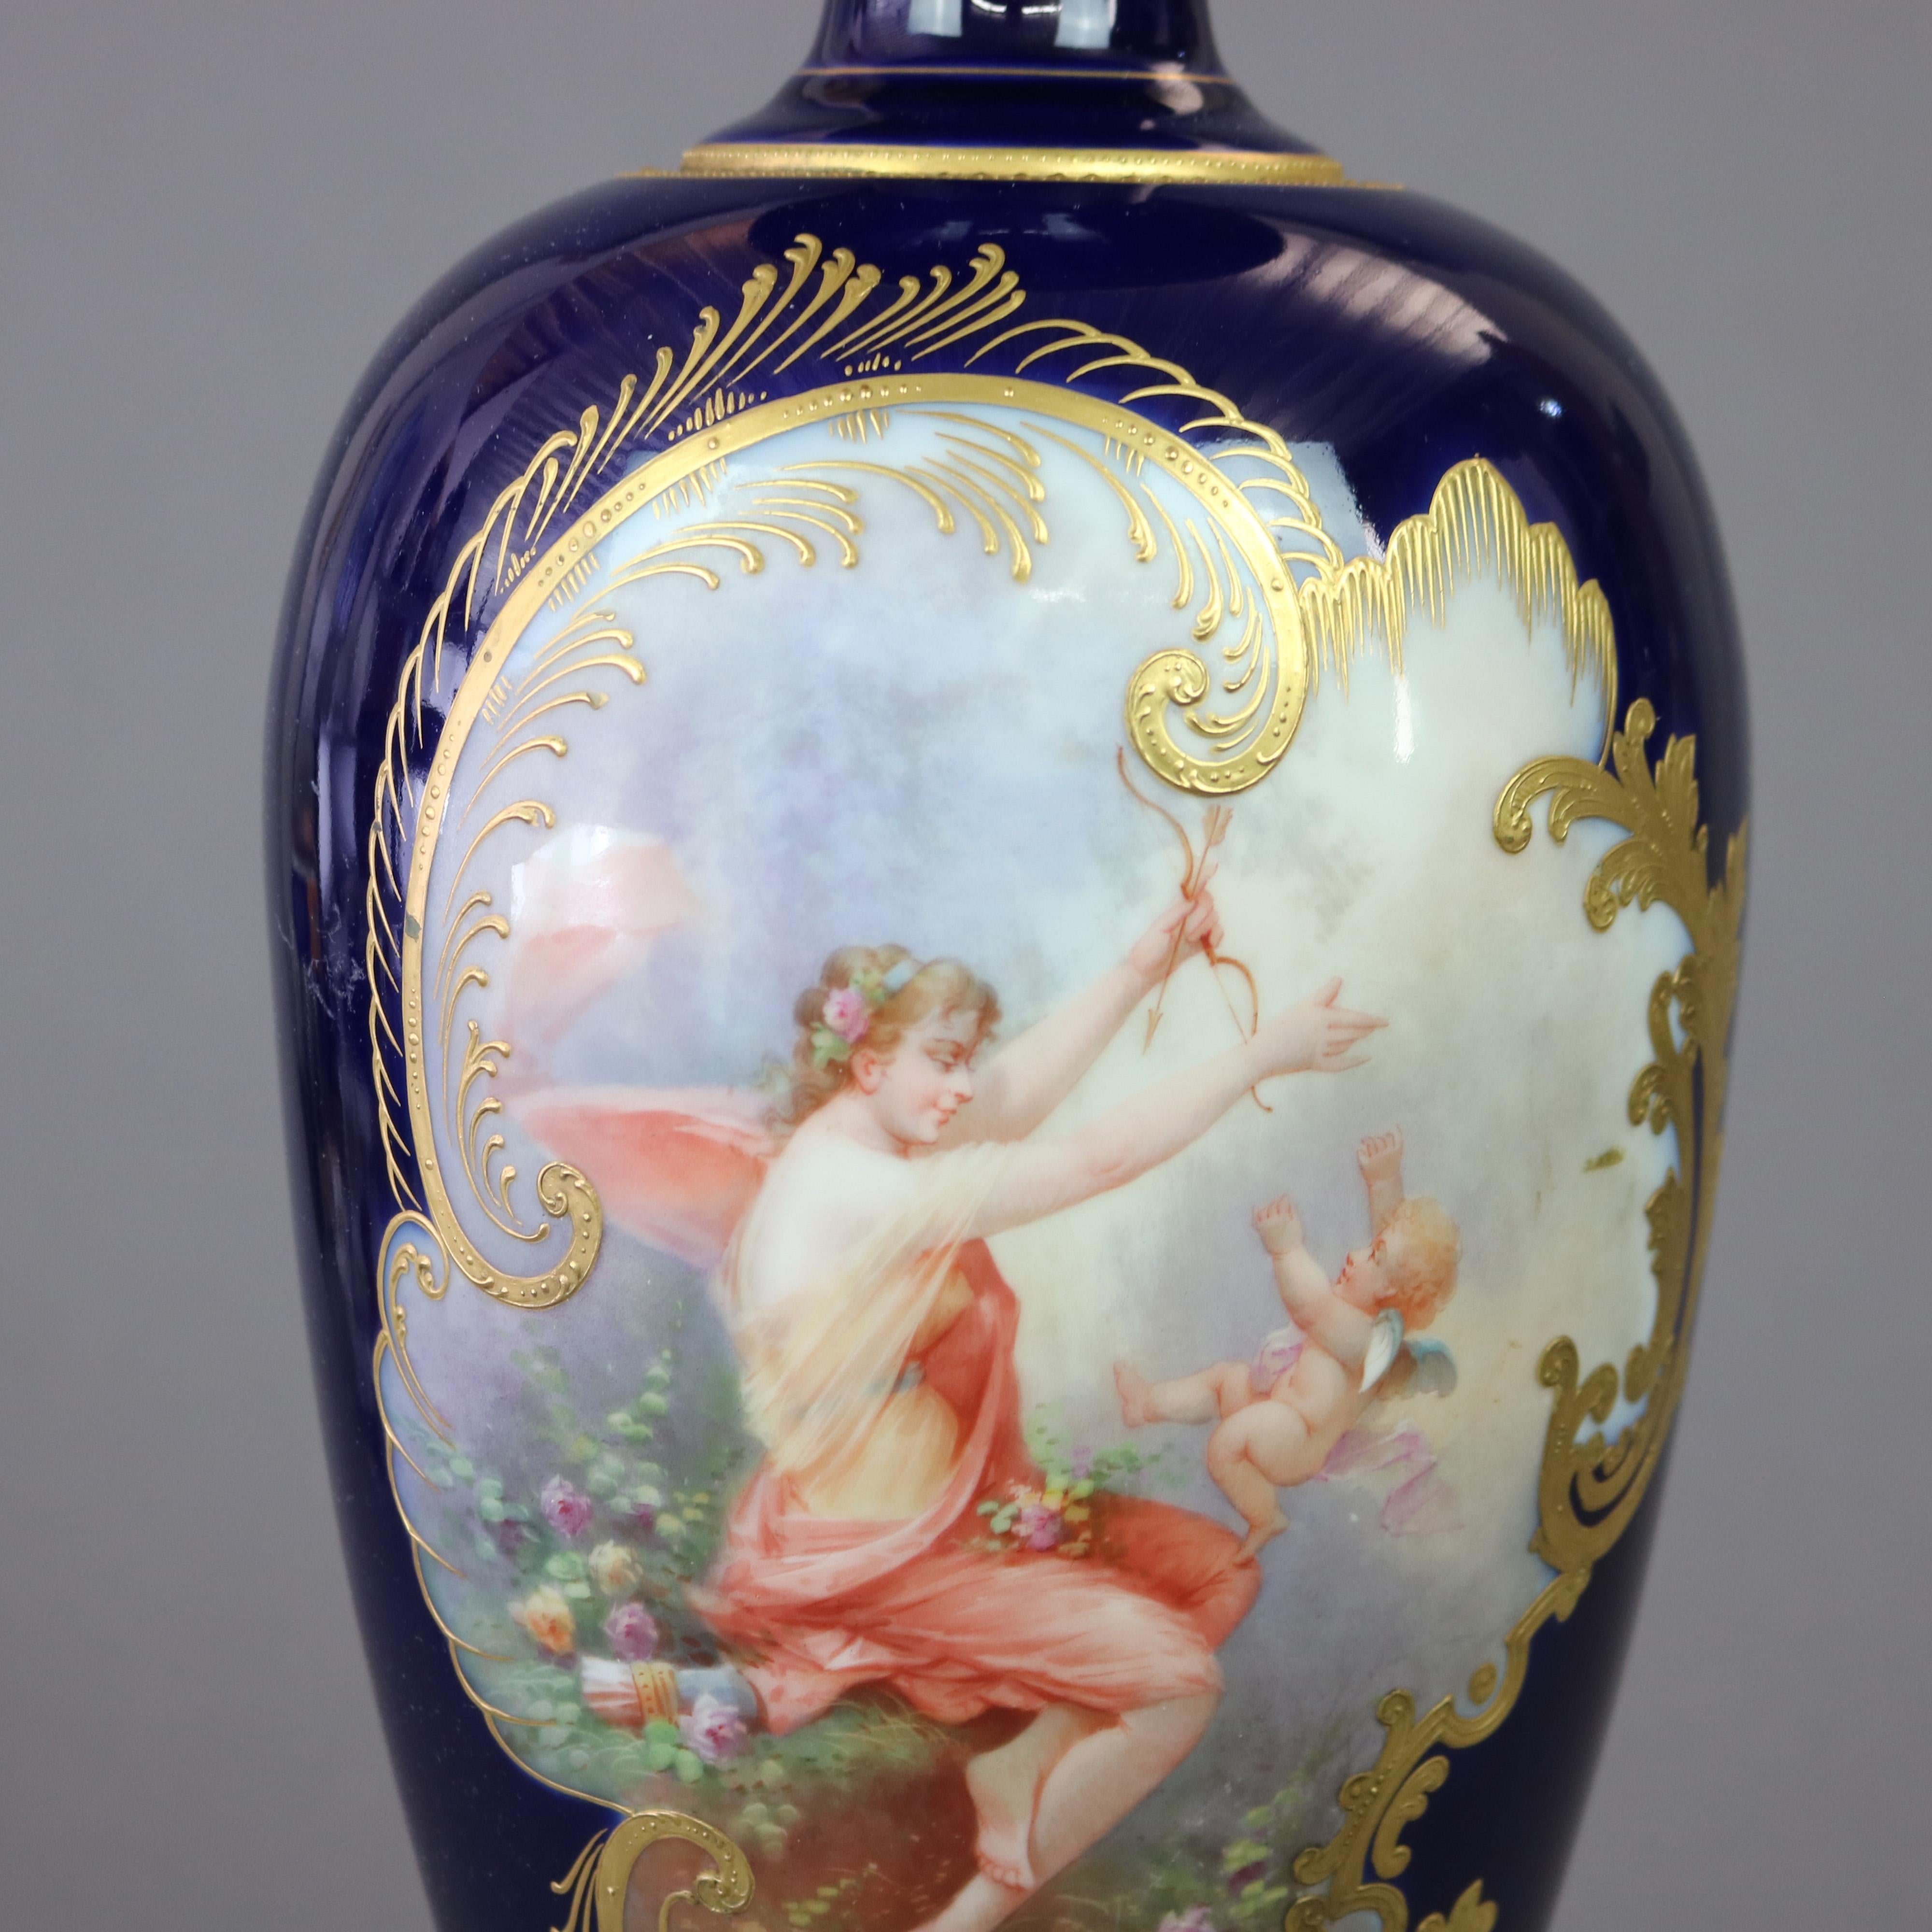 A large French Limoges urn offers porcelain construction with hand painted allegorical reserve with woman and cherub on cobalt blue ground, gilt highlights throughout, maker mark on base as photographed, c1900

Measures - 21.25